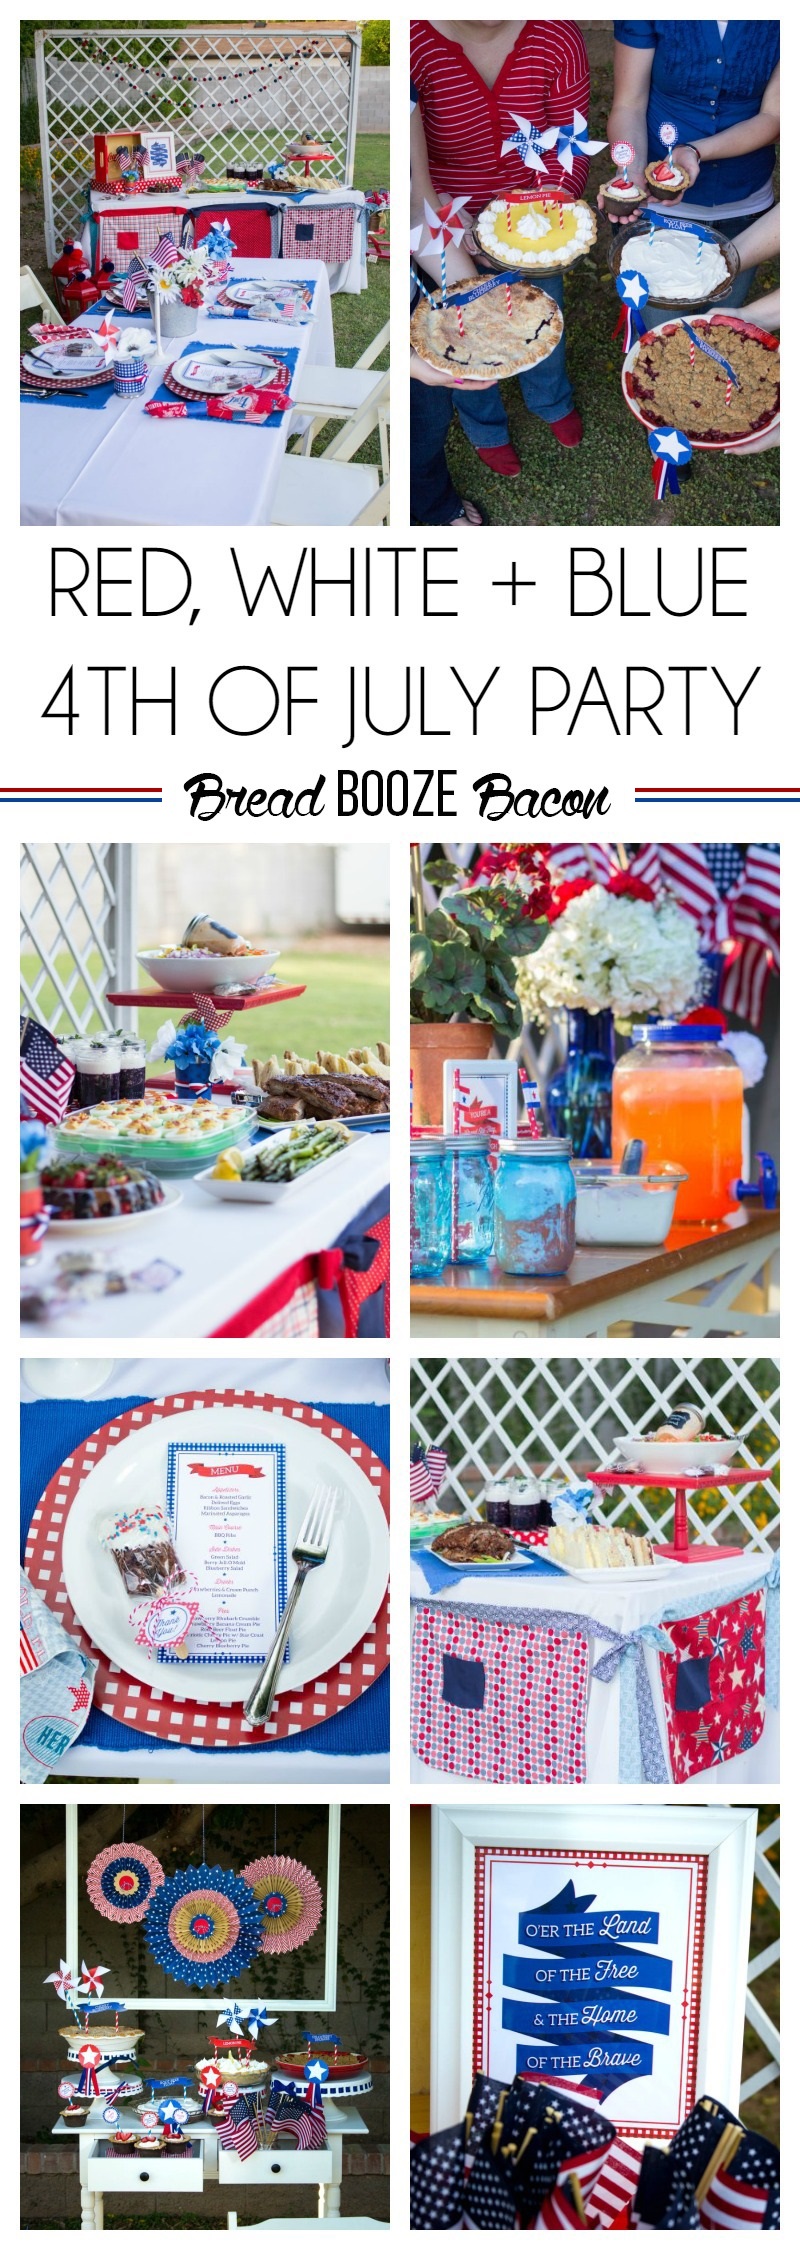 Red, White + Blue 4th of July Party | Bread Booze Bacon